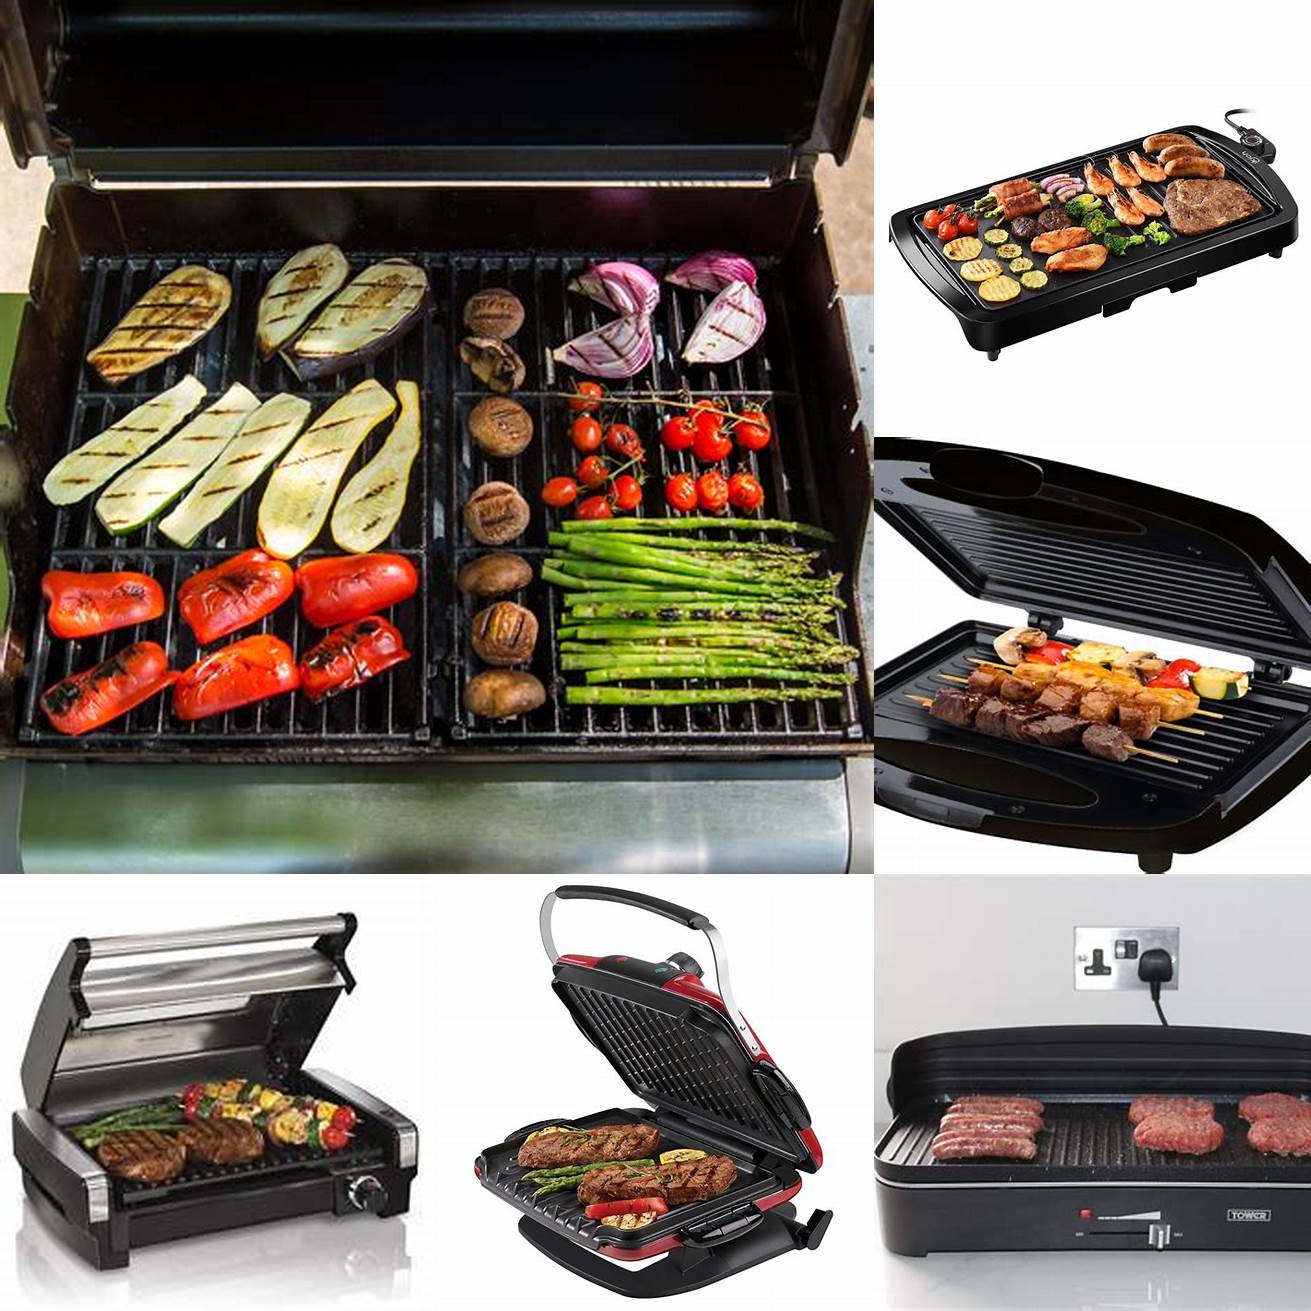 Electric grill with grilled vegetables